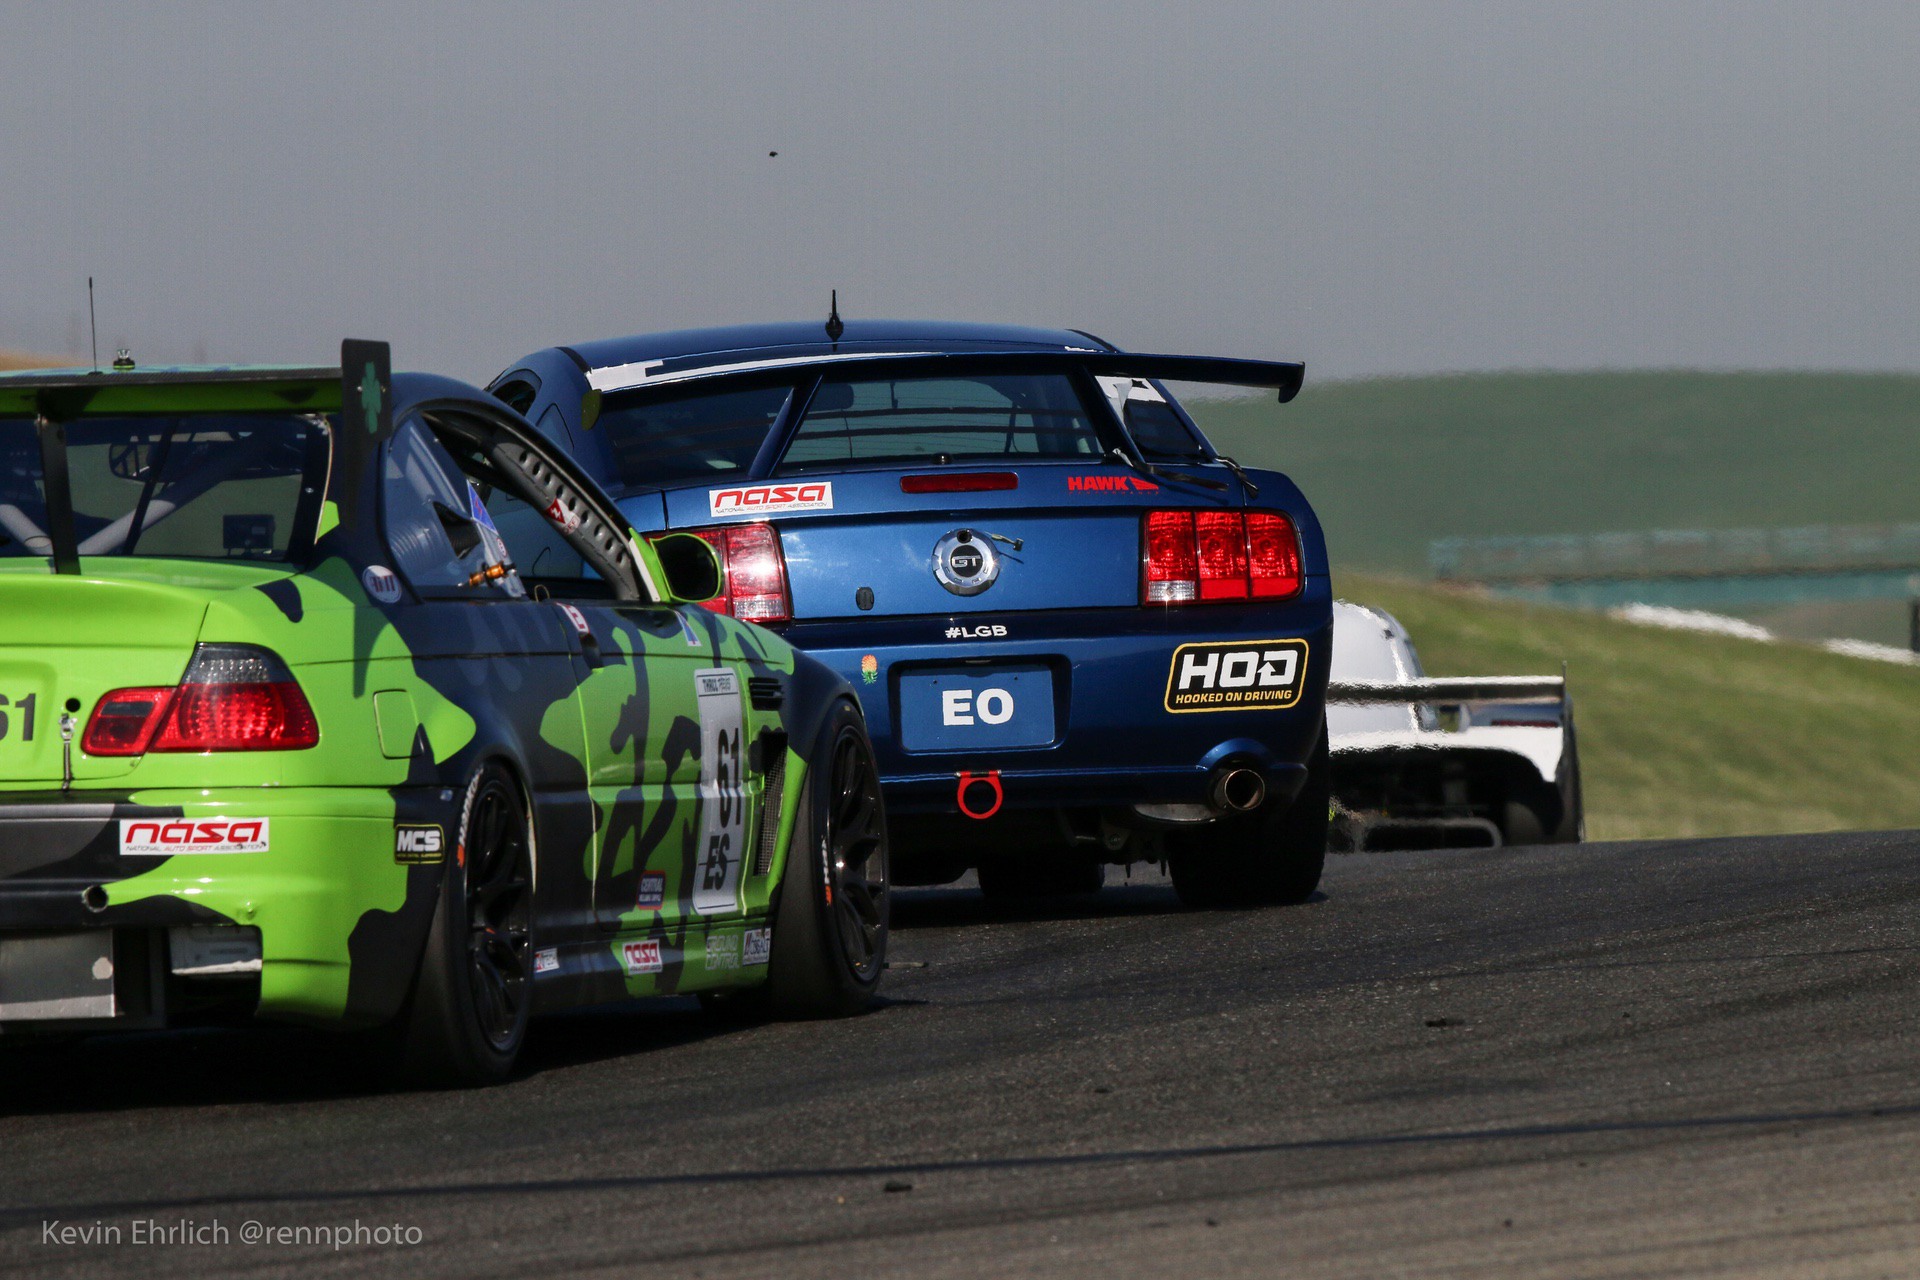 Rear view of 2008 Ford Mustang packed together with other cars at Thunderhill 2021